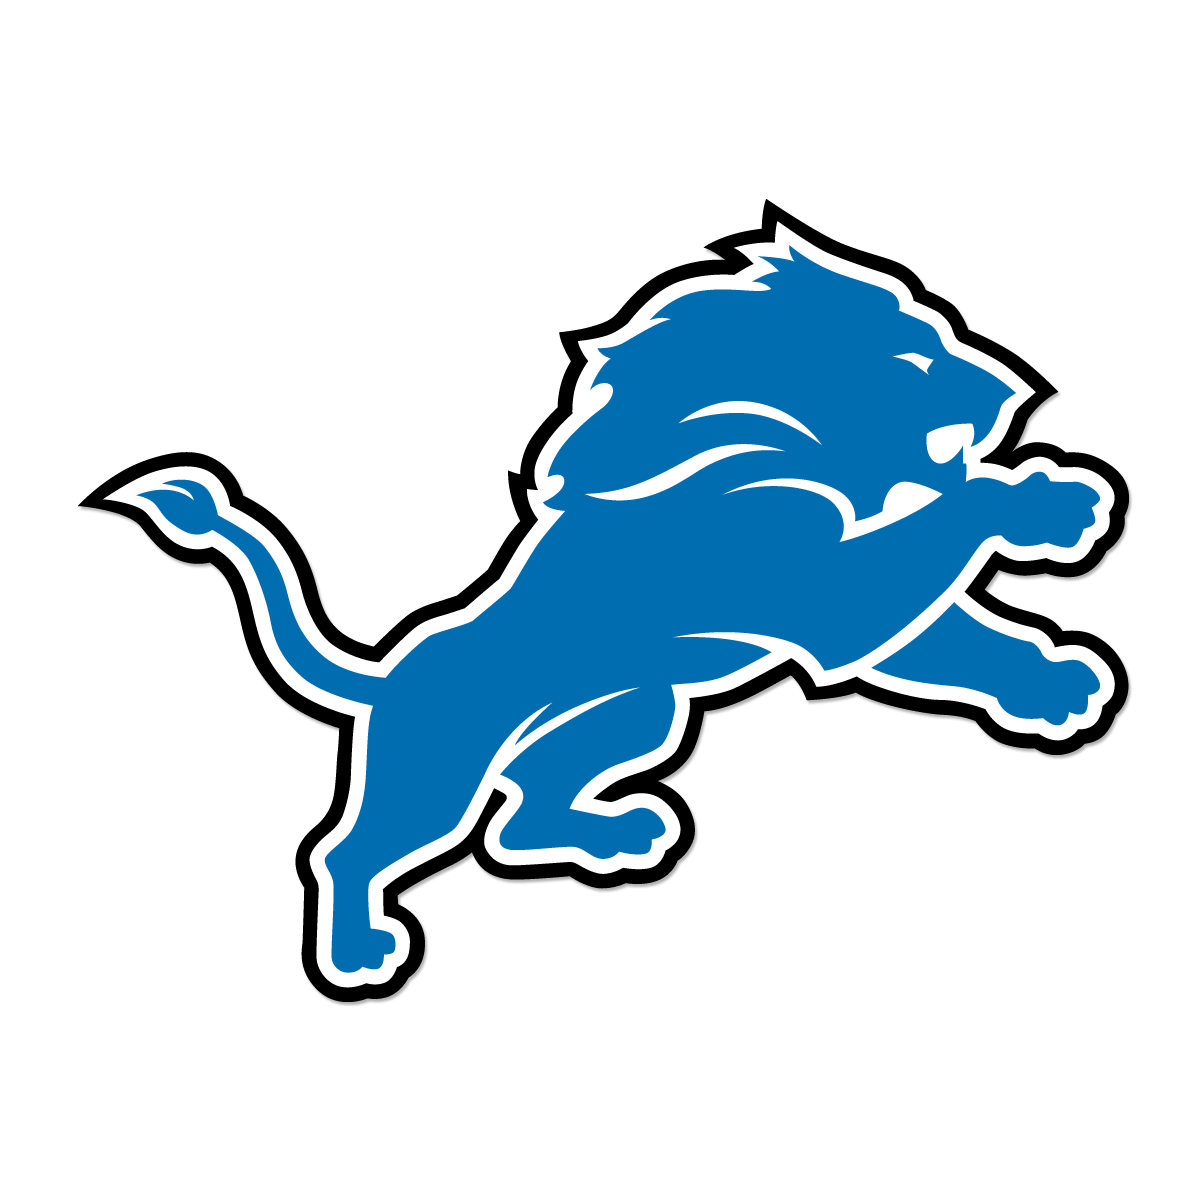 Detroit Lions New Logo - For the Detroit Lions, New Year's Day will bring either redemption